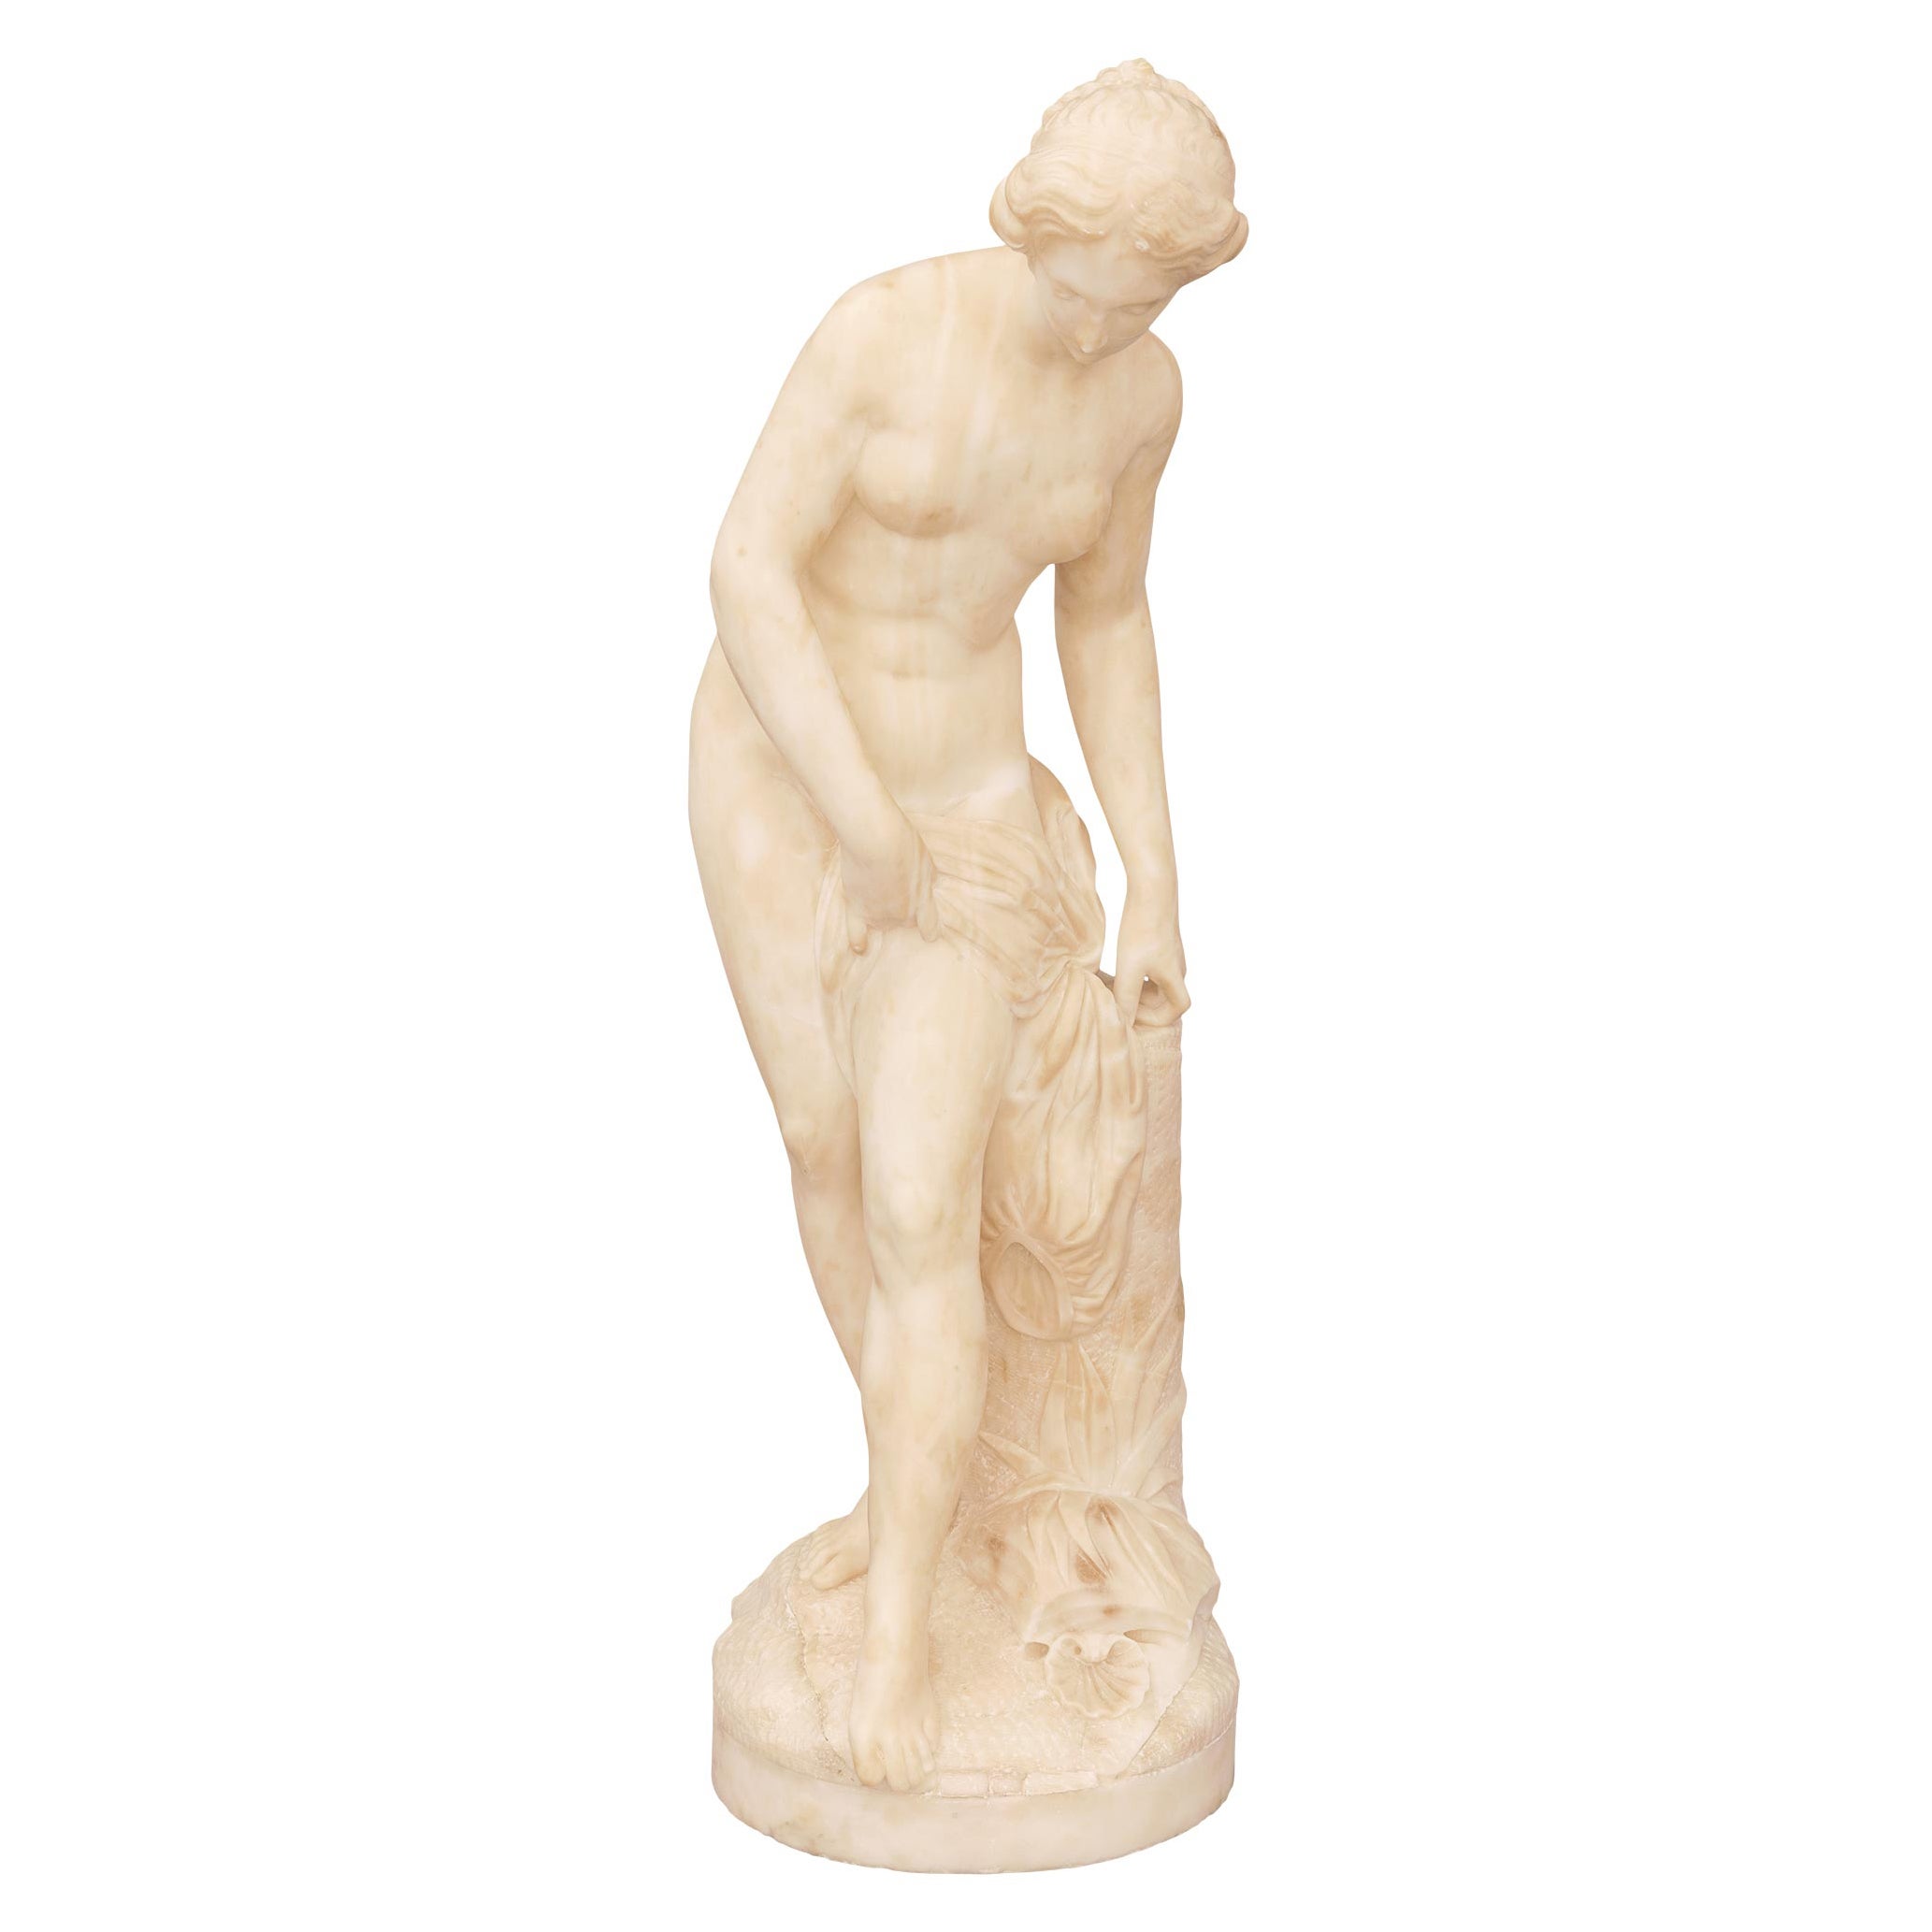 French 19th Century Alabaster Statue of 'La Baigneuse" After a Model by Falconet For Sale